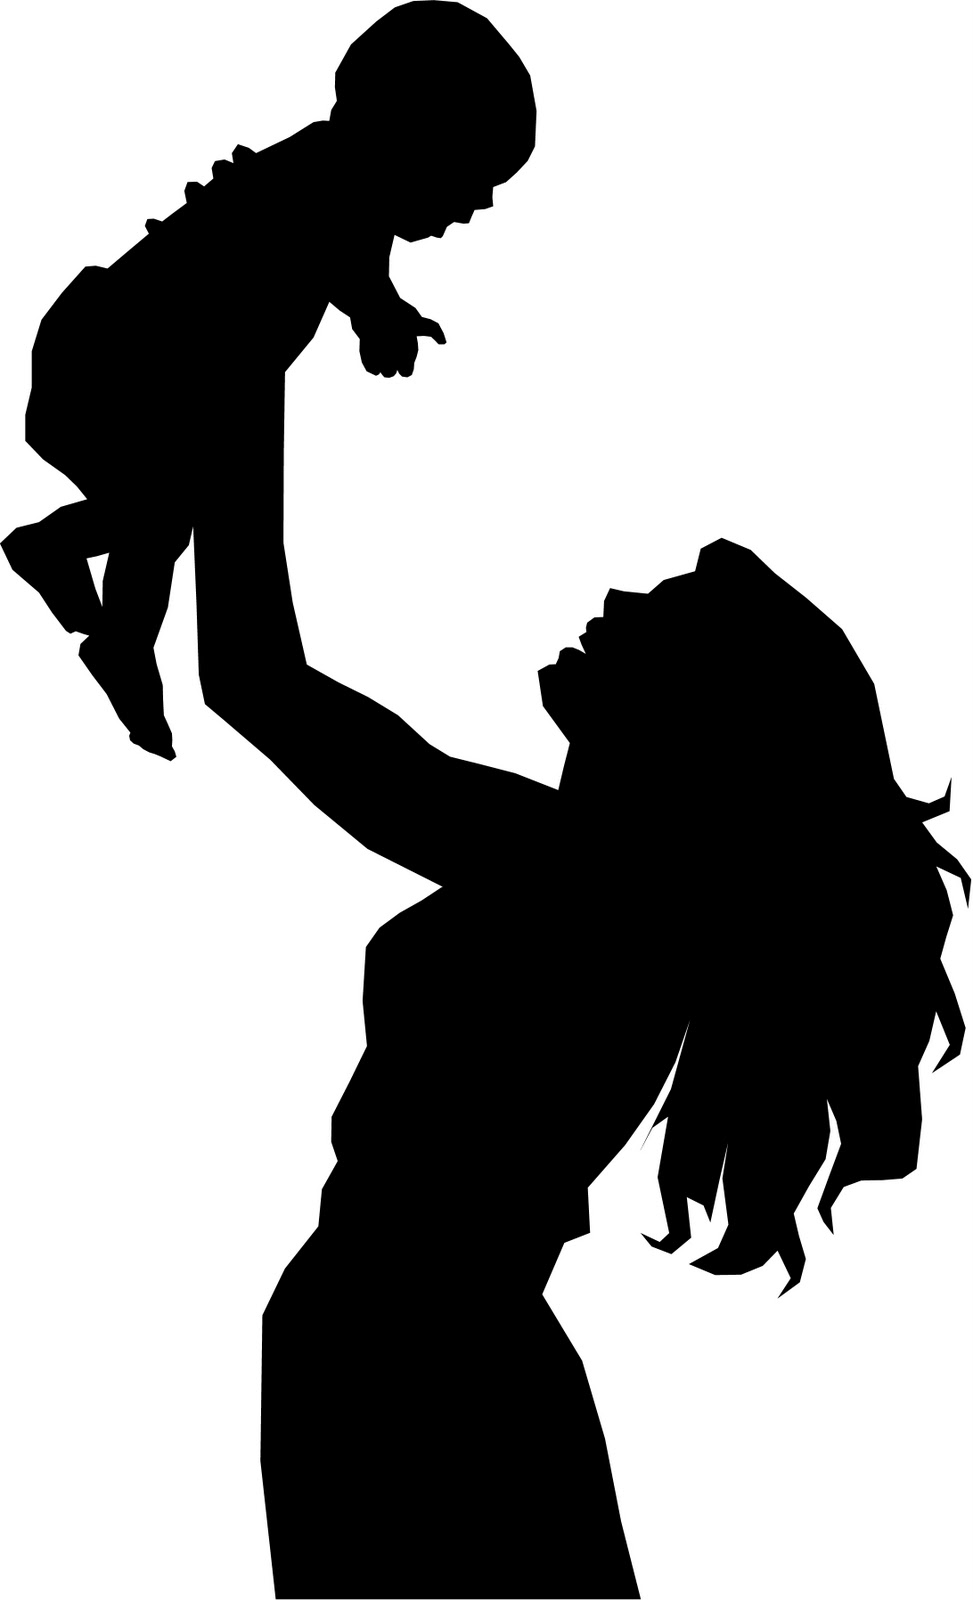 Mother and child silhouette clip art free.